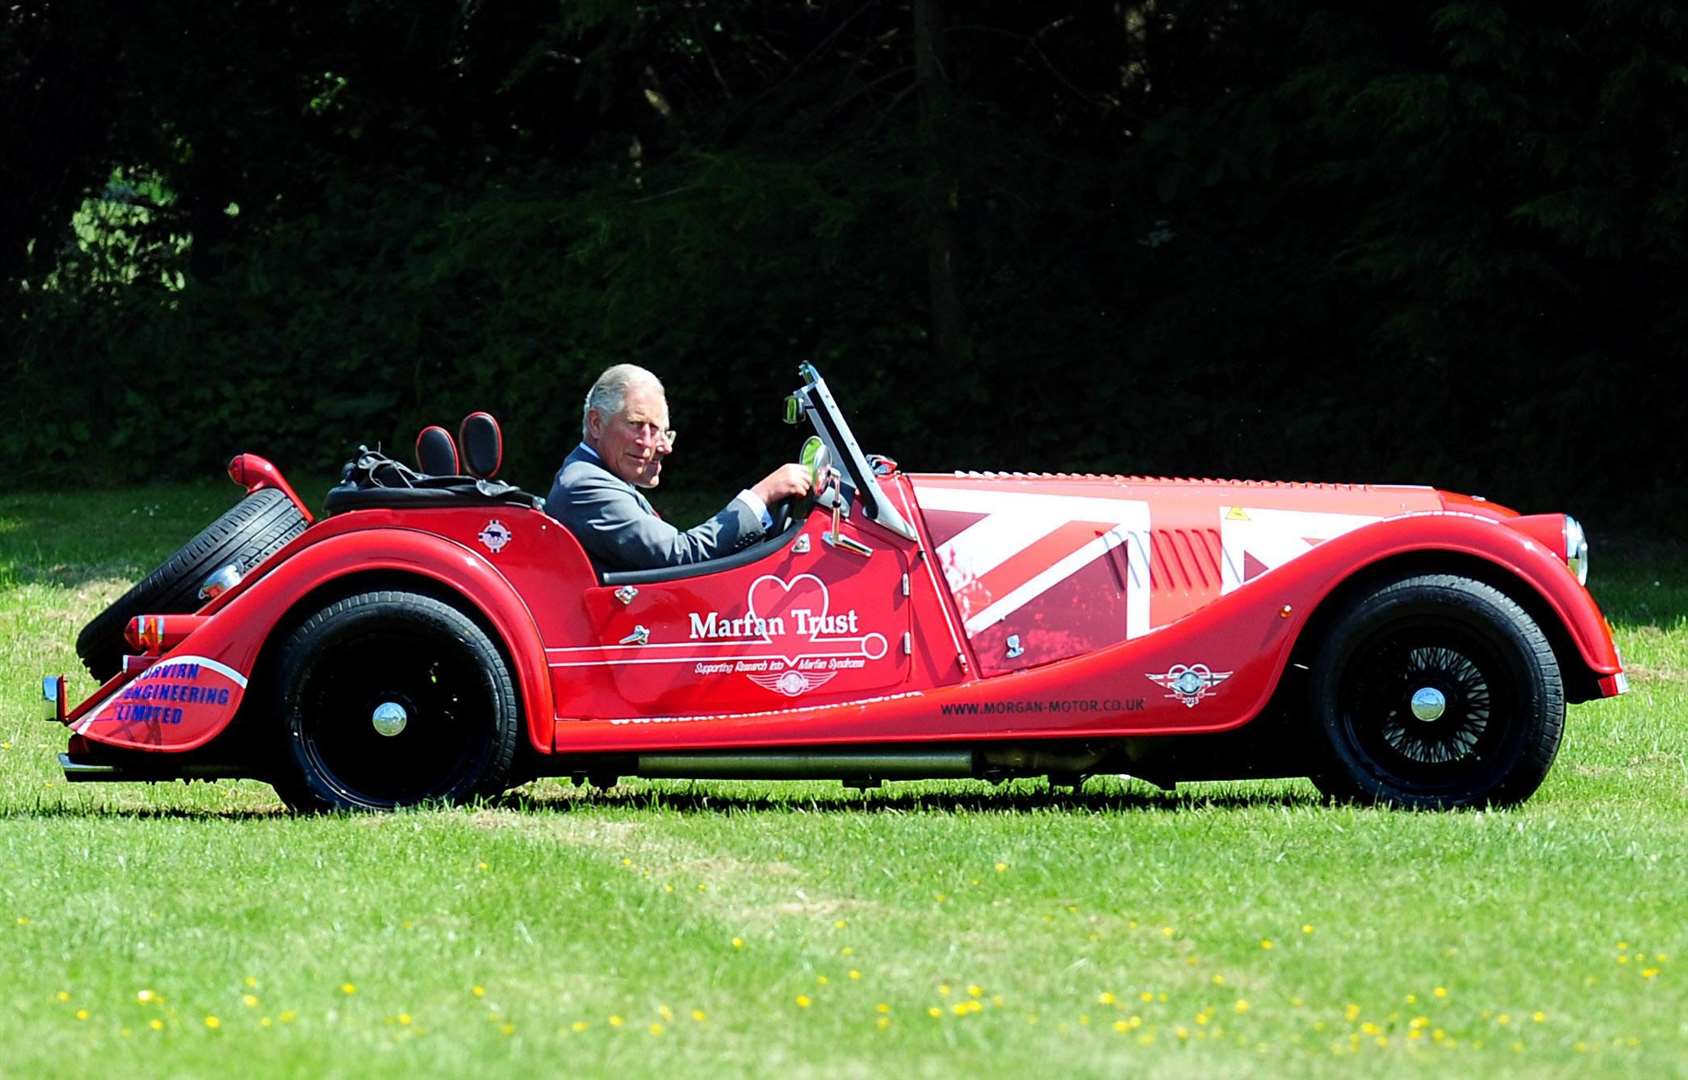 The King in a Morgan Plus 4 car during a visit to Morgan Motor Company in Malvern, Worcestershire (PA)